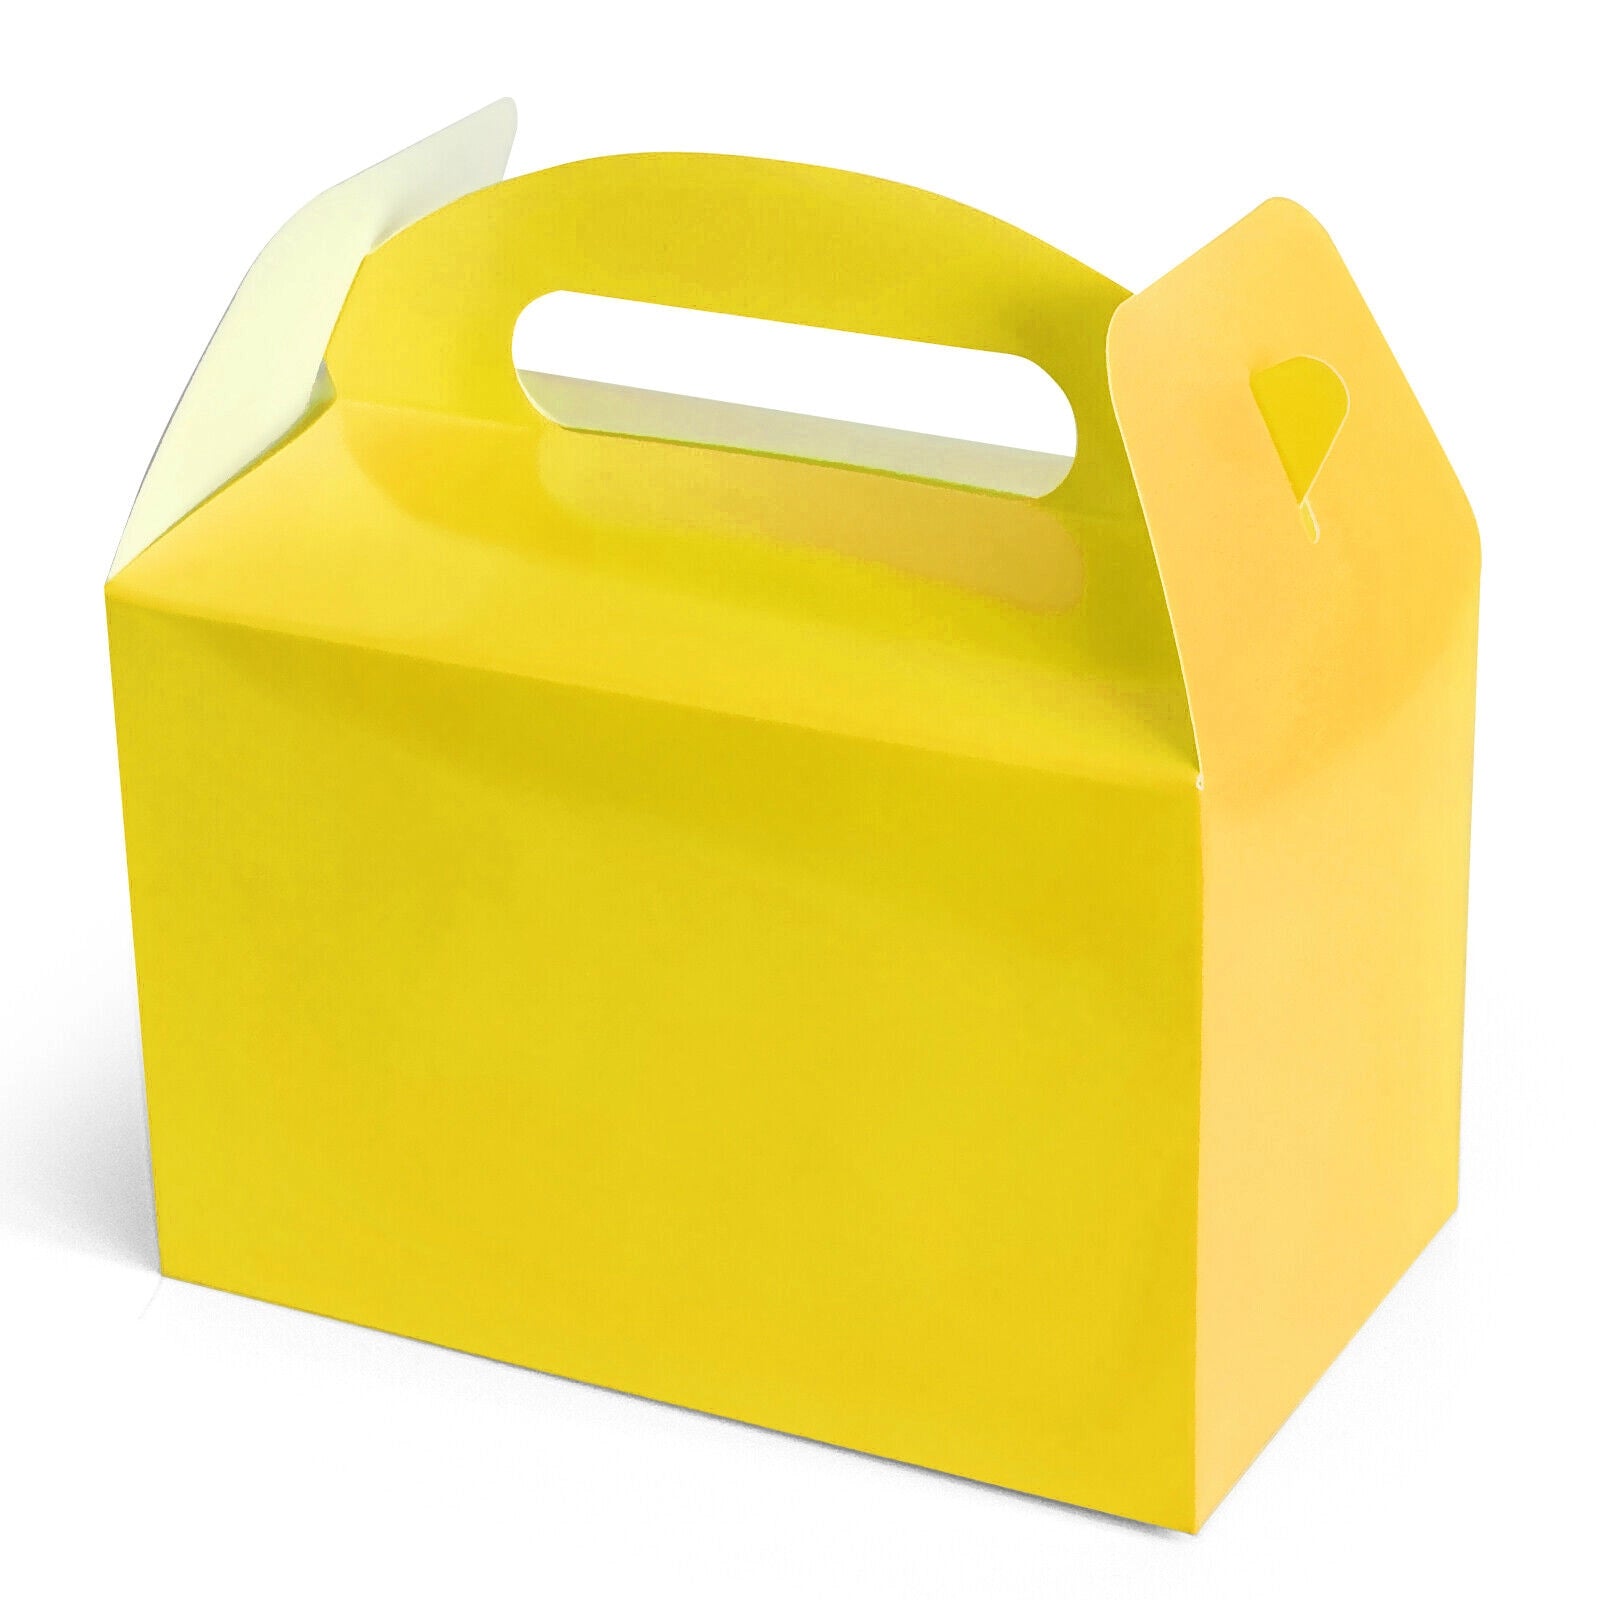 Personalised Party Boxes for Birthday Gift Christmas Loot - Yellow Box